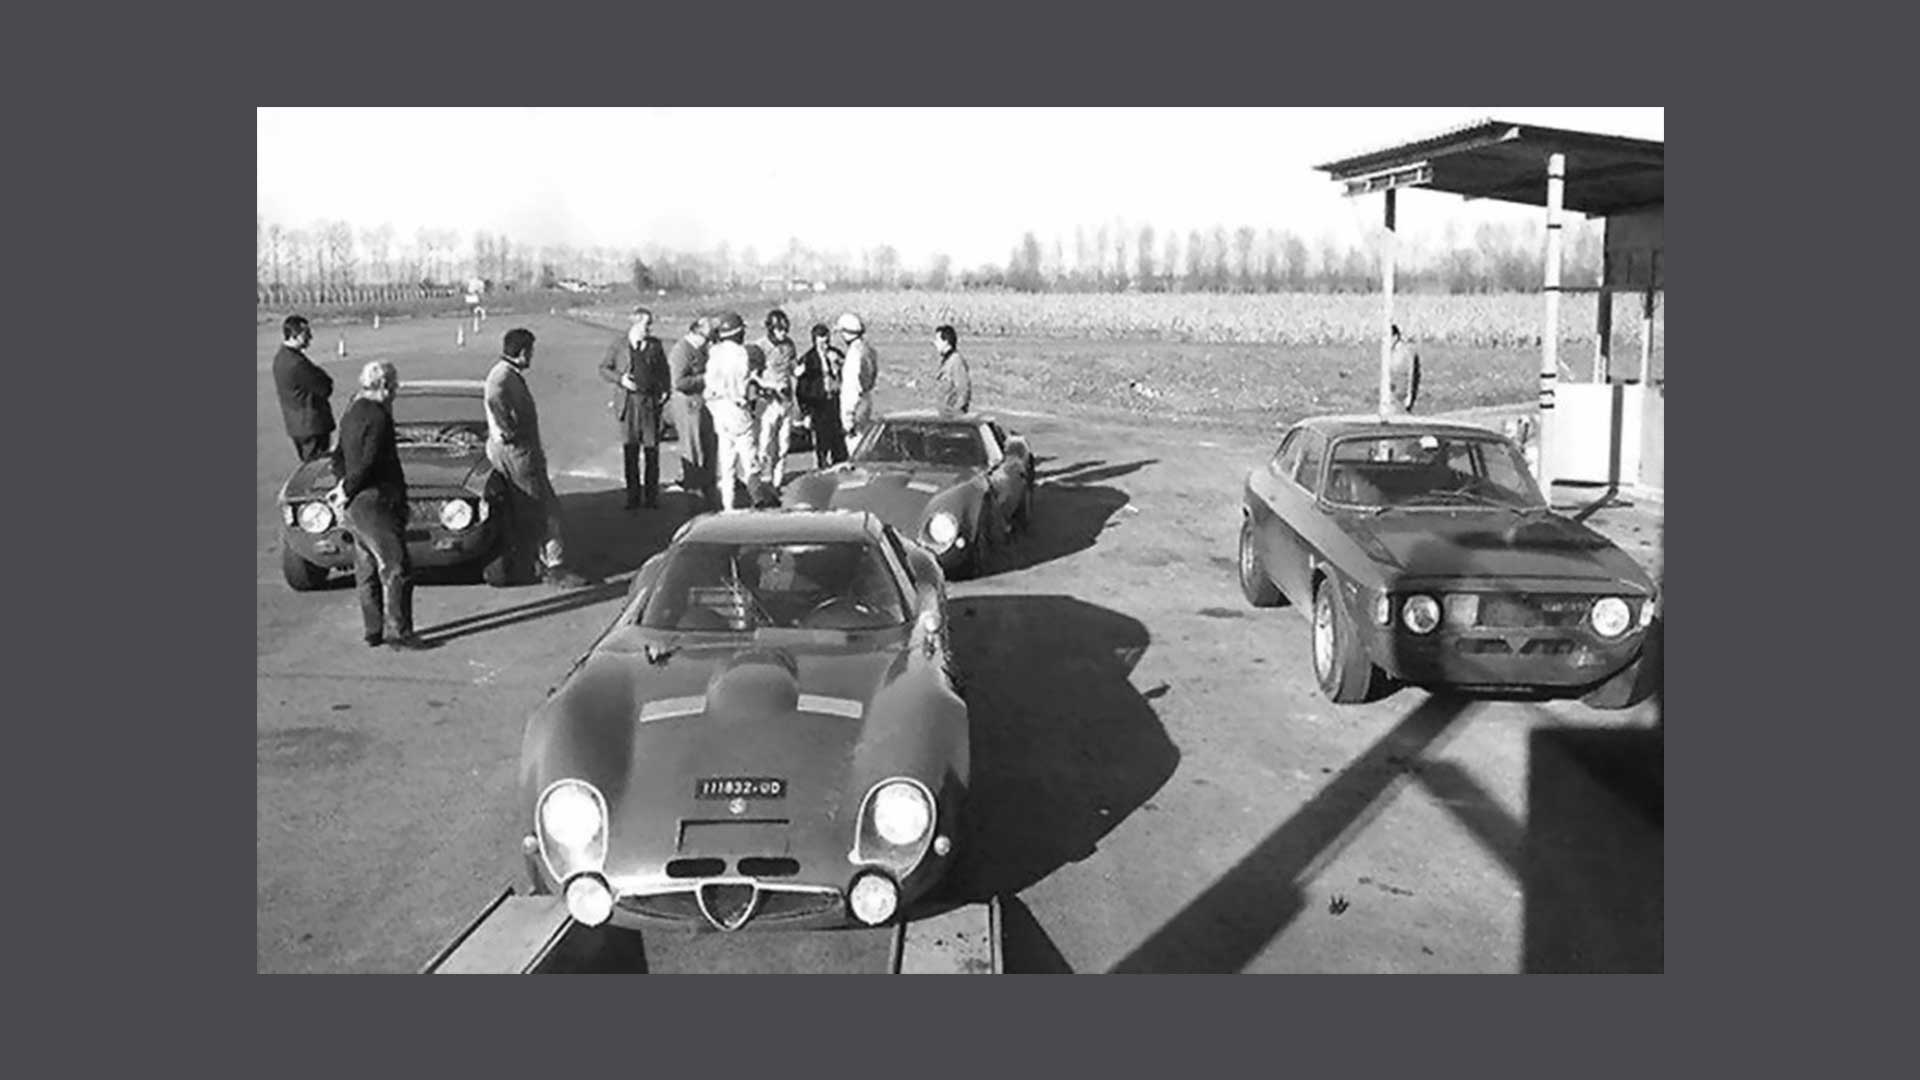 Historical photo of cars and motorists on the track